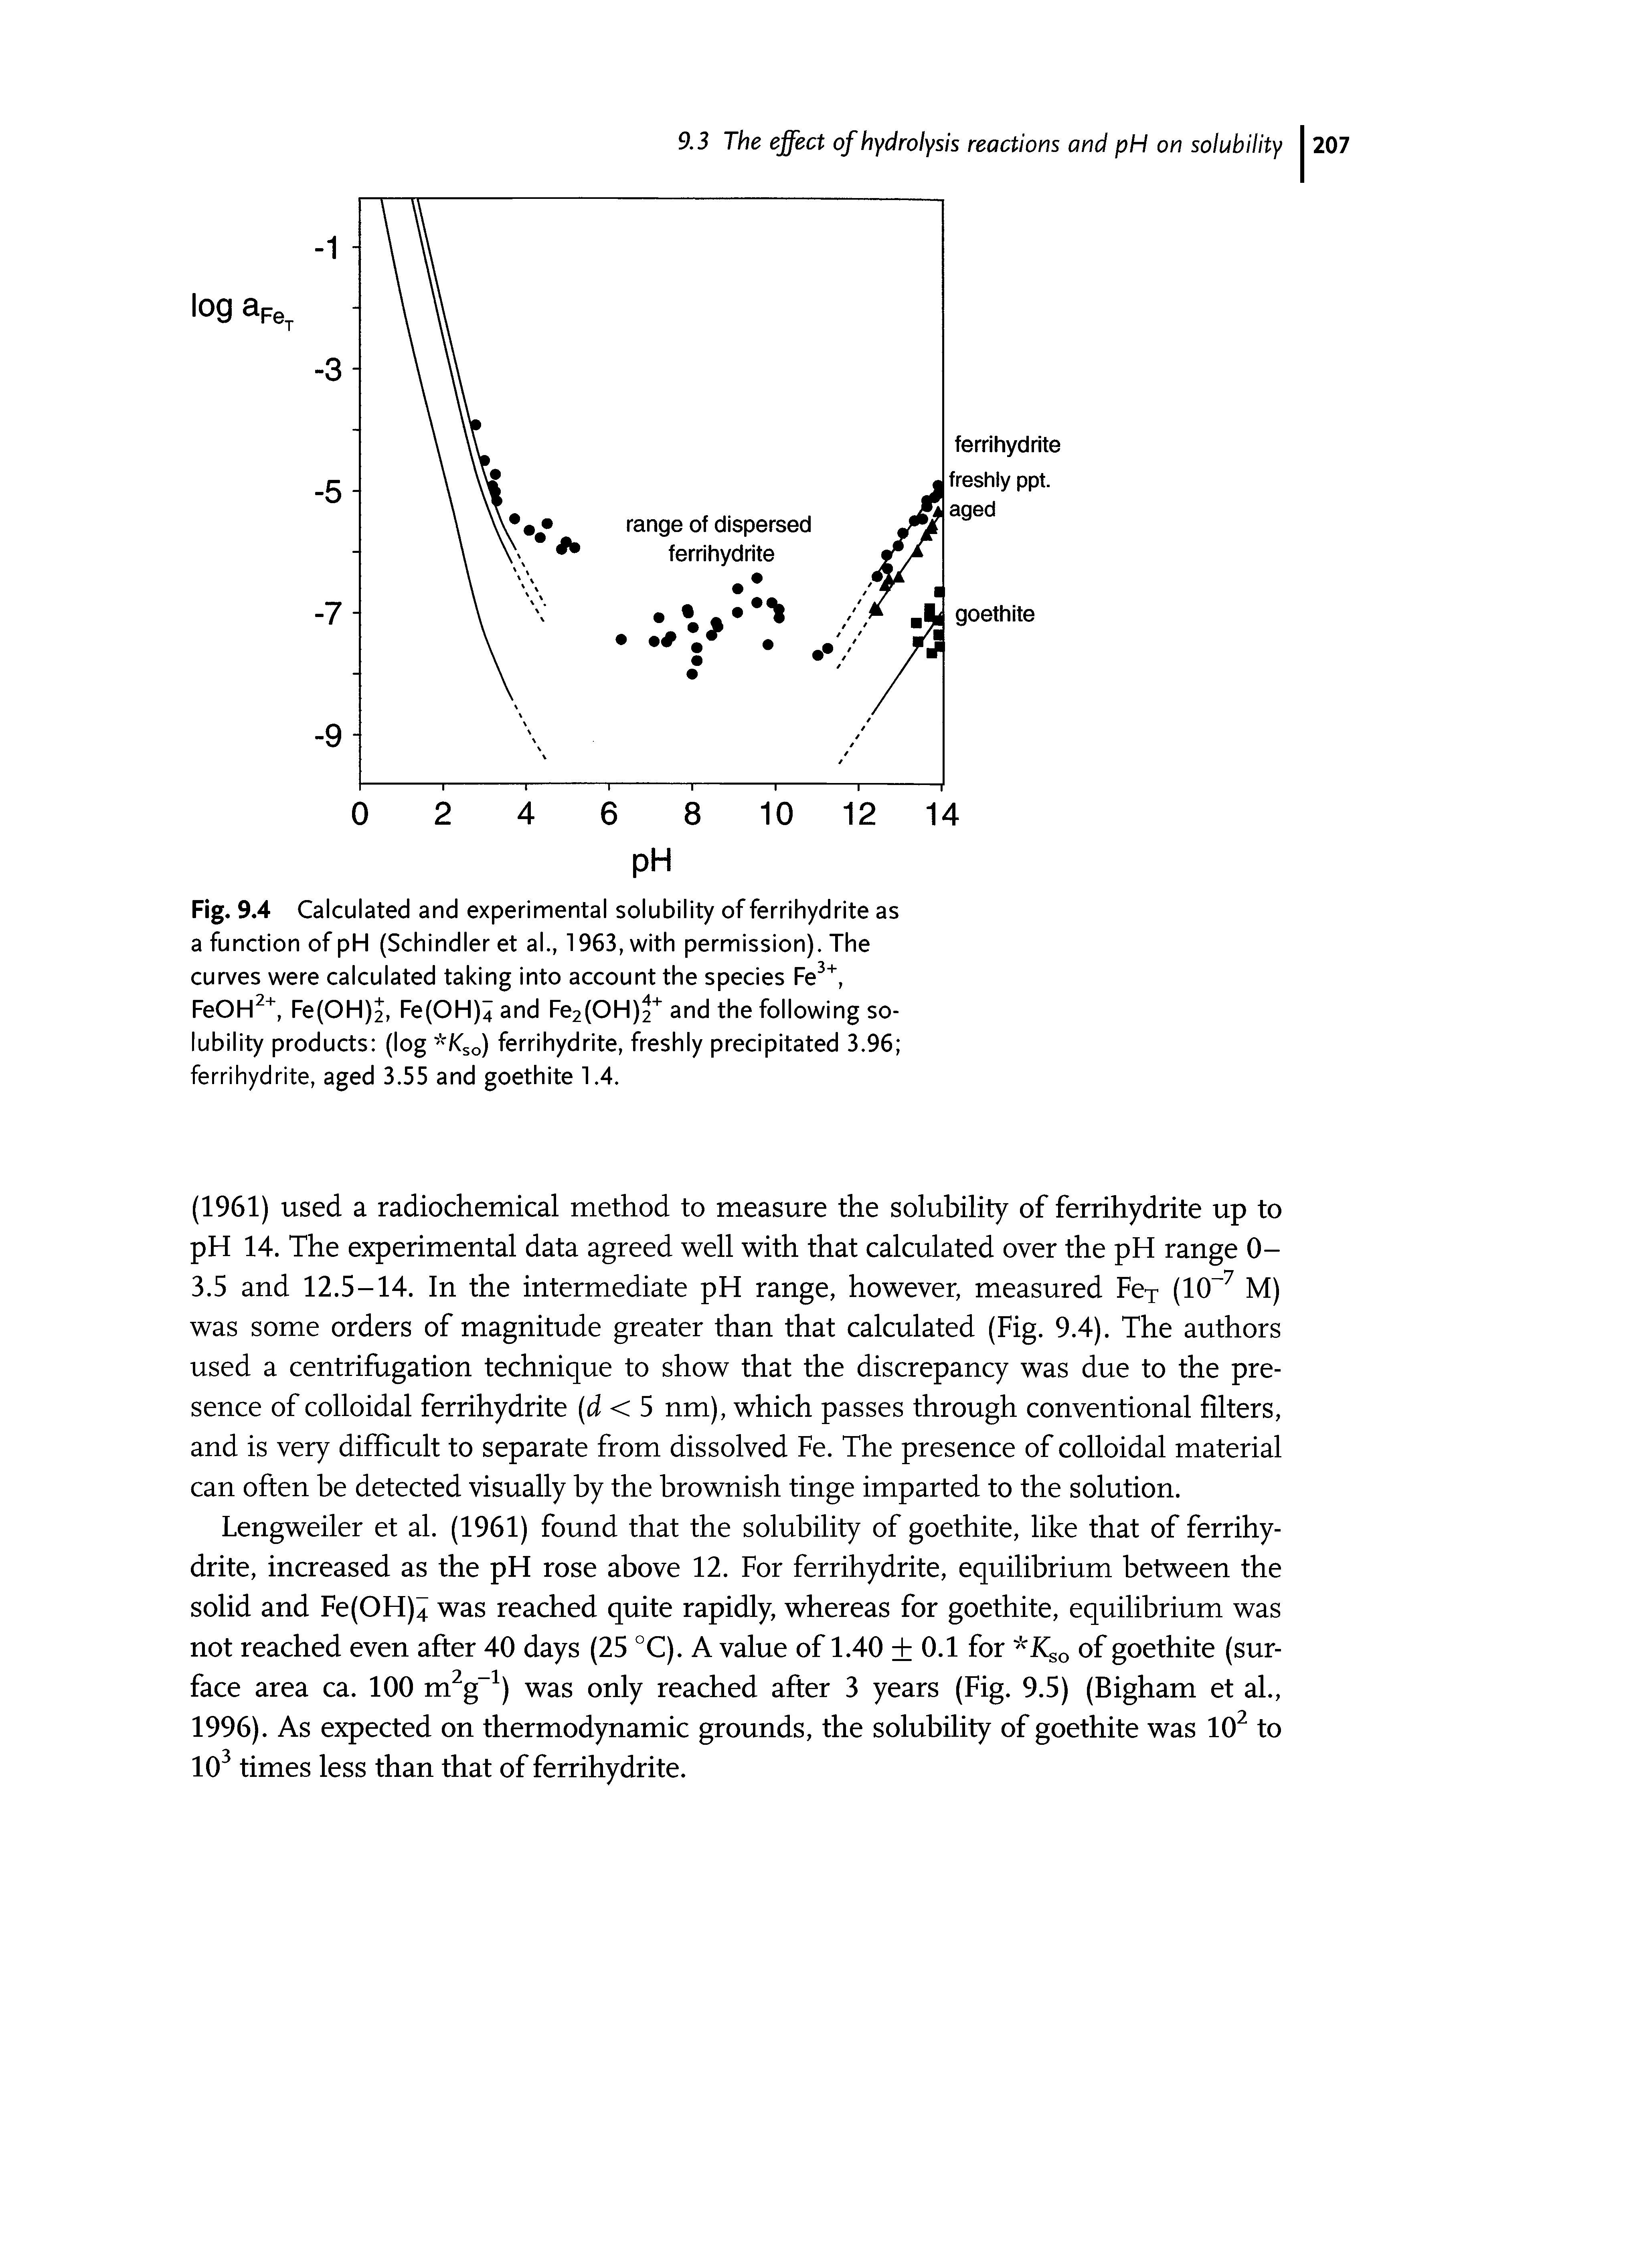 Fig. 9.4 Calculated and experimental solubility of ferrihydrite as a function of pH (Schindler et al., 1963, with permission). The curves were calculated taking into account the species Fe FeOH Fe(OH)J, Fe(OH)4 and Fe2(OH) and the following solubility products (log - Kso) ferrihydrite, freshly precipitated 3.96 ferrihydrite, aged 3.55 and goethite 1.4.